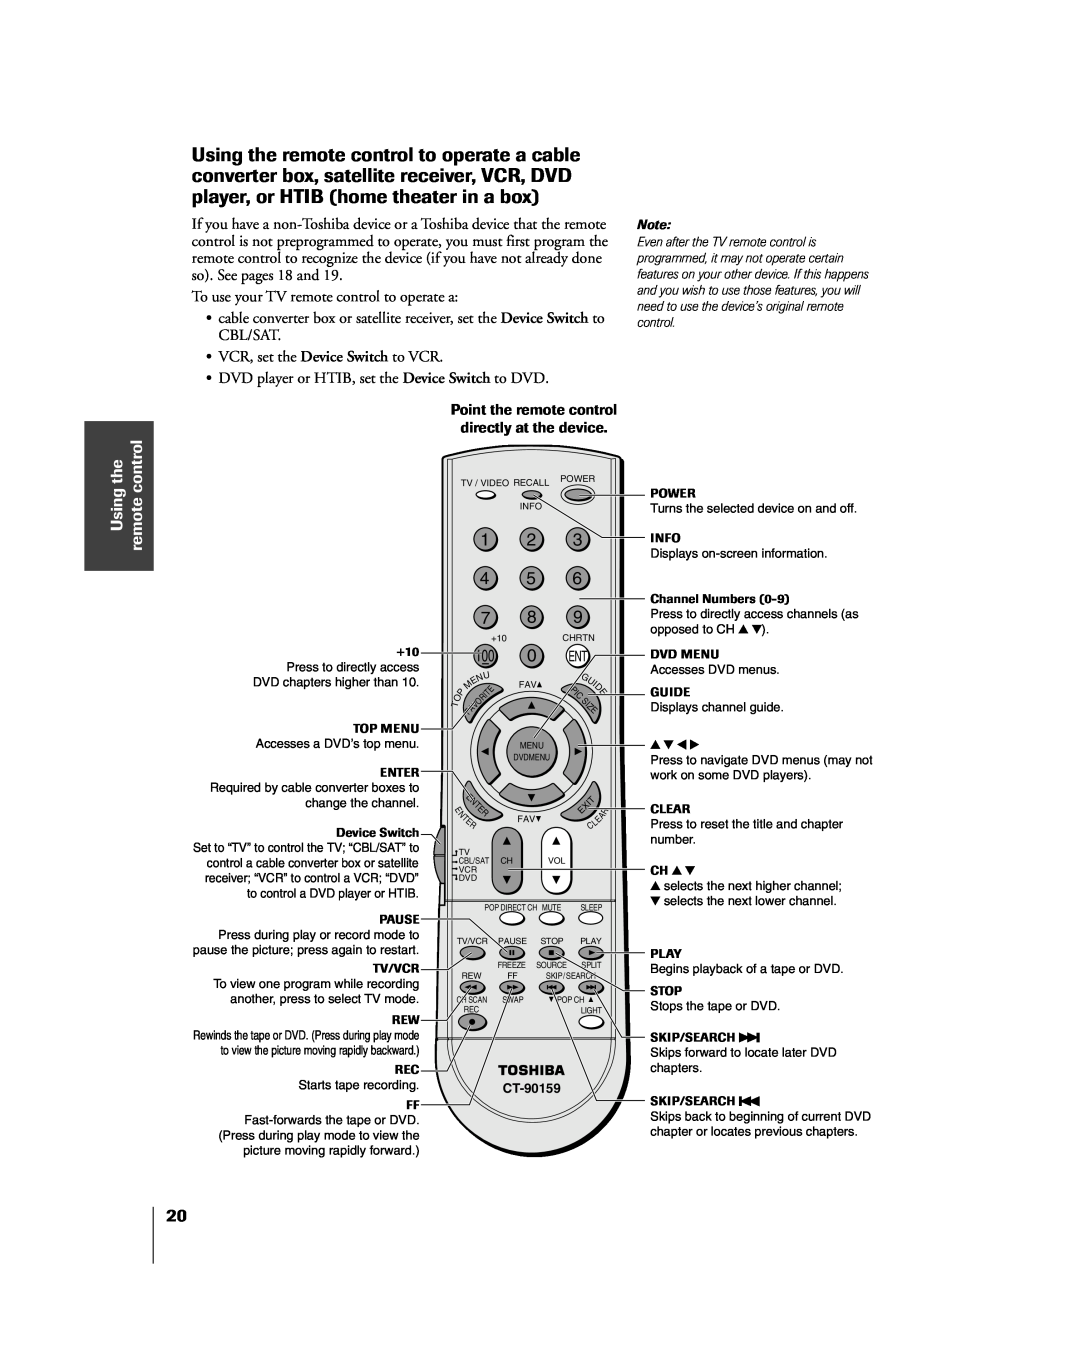 Toshiba 57H85C To use your TV remote control to operate a, ¥ VCR, set the Device Switch to VCR, Using the remote control 